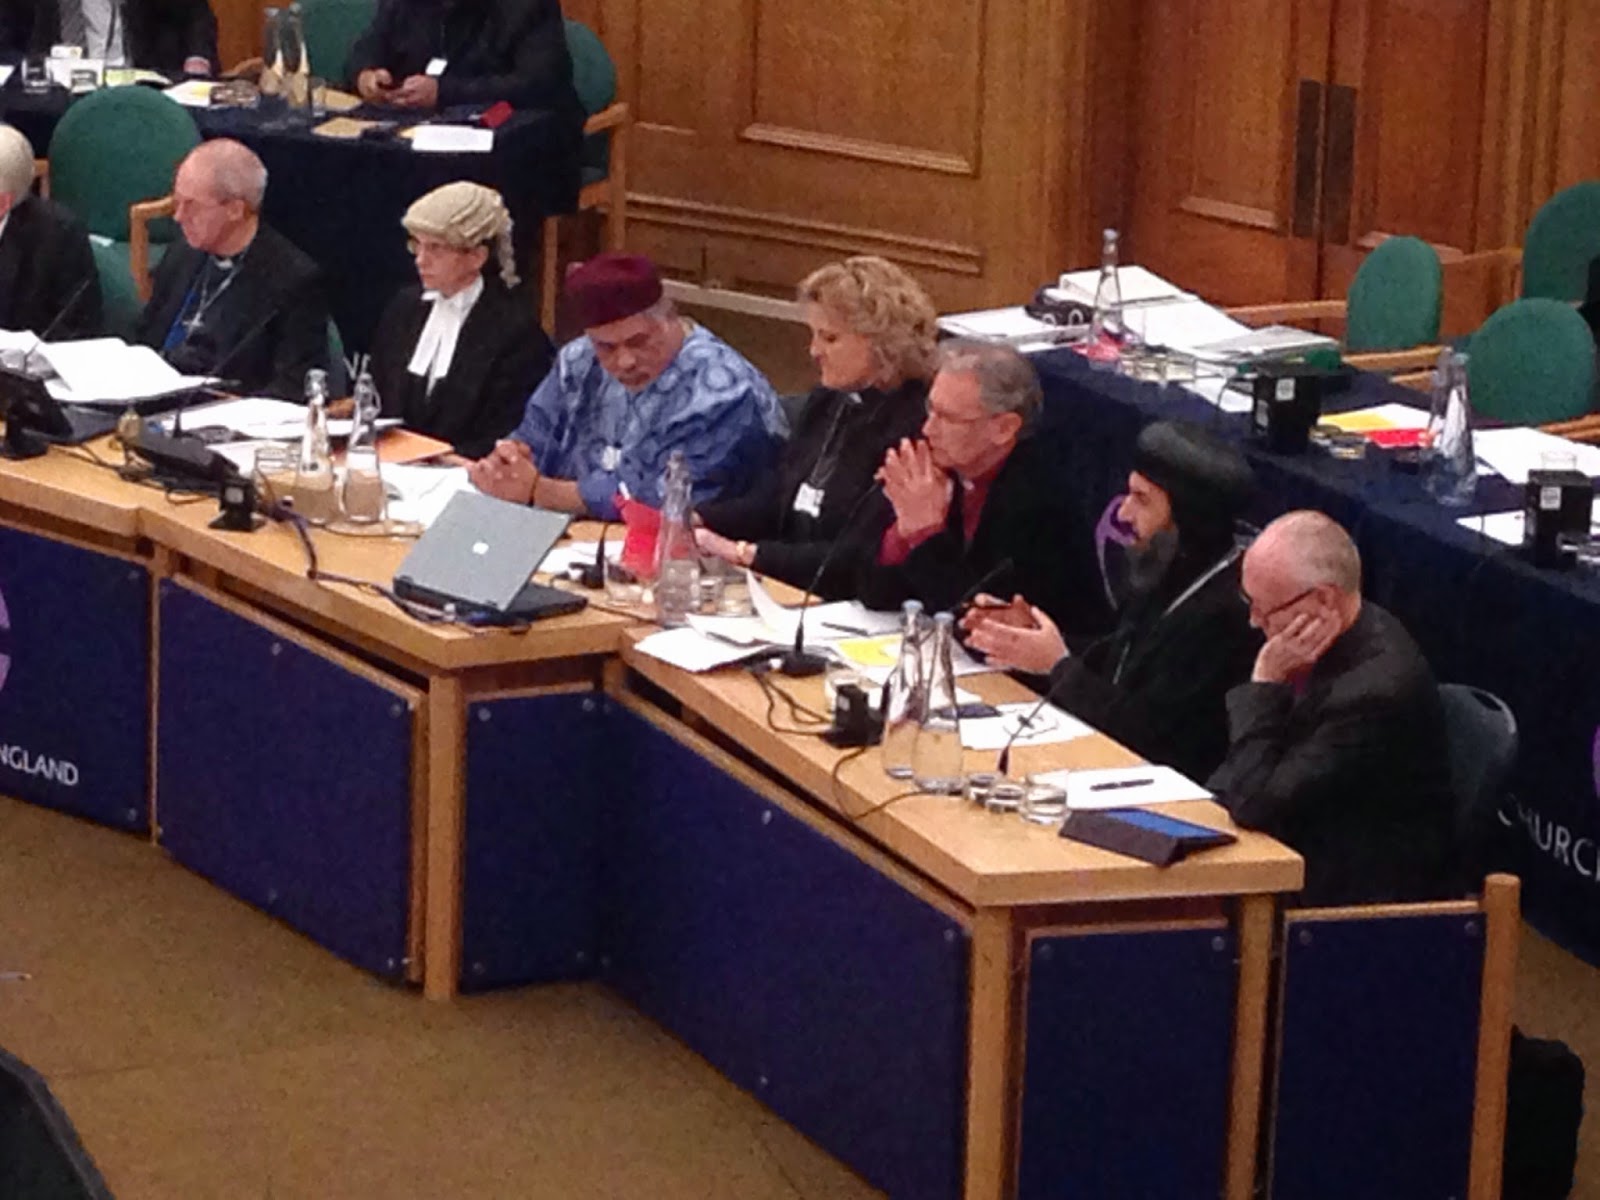 The Church of England General Synod Panel on violence against minorities in Syria and Iraq